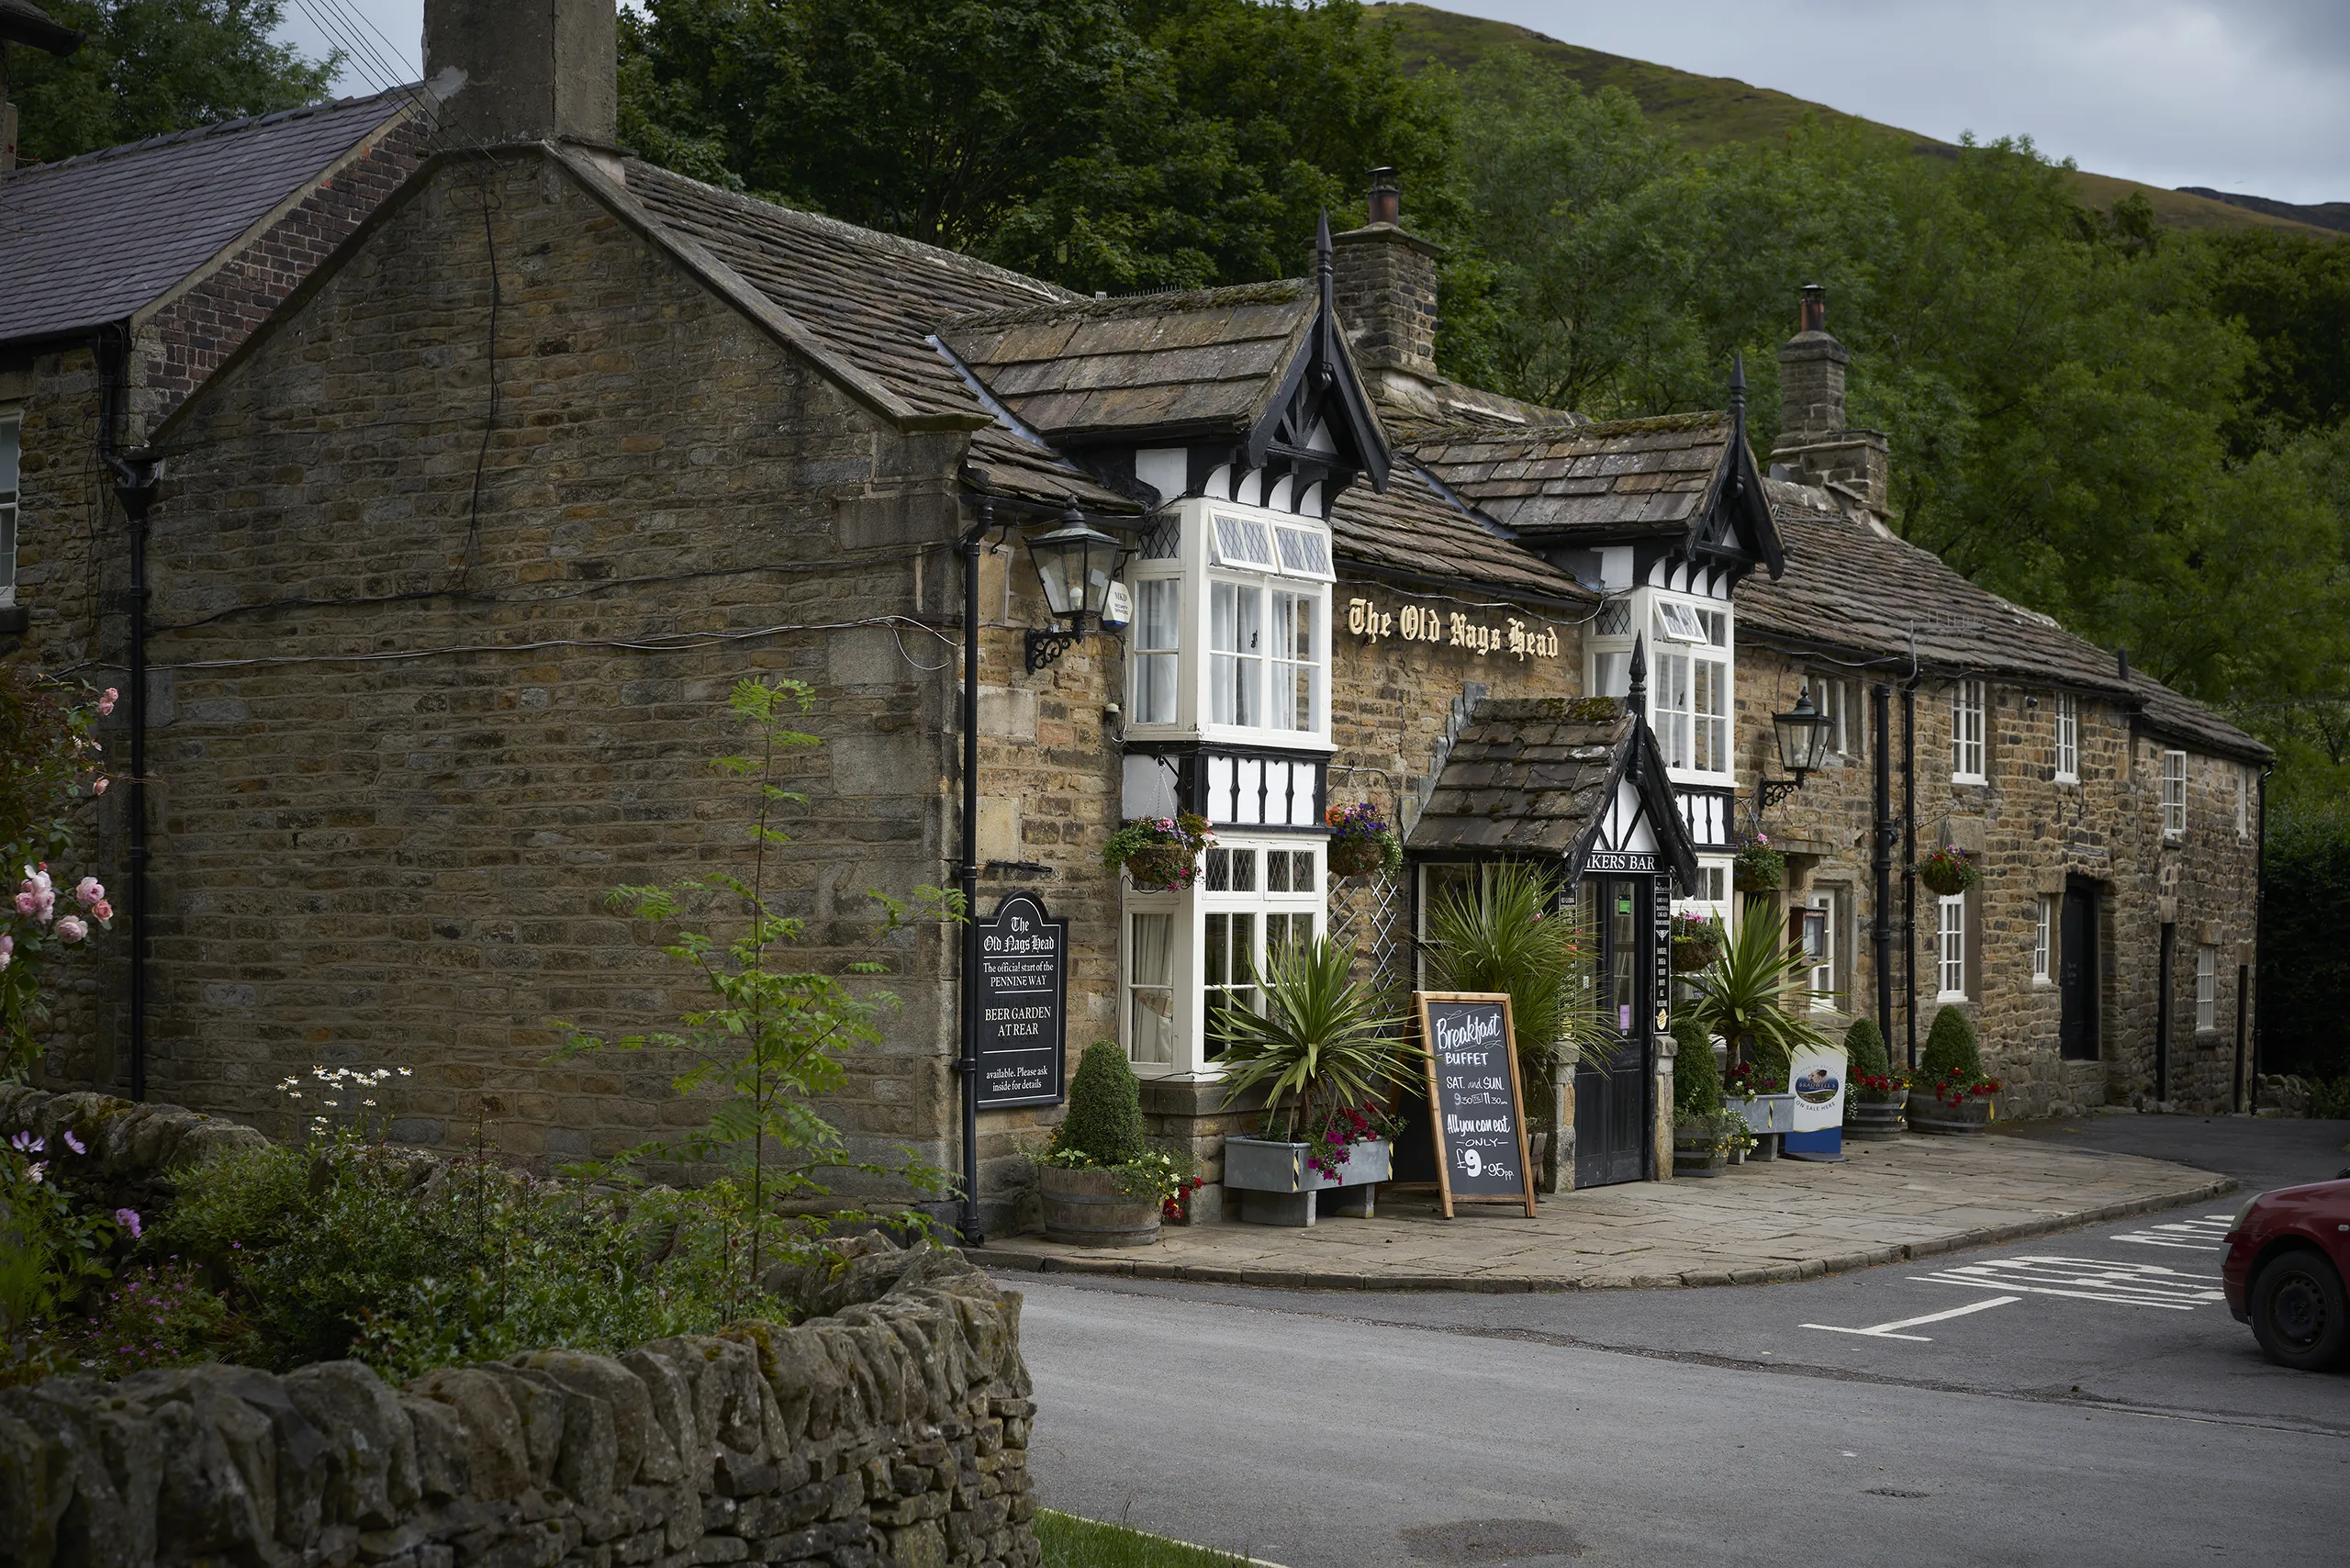 The Old Nags Head, Edale